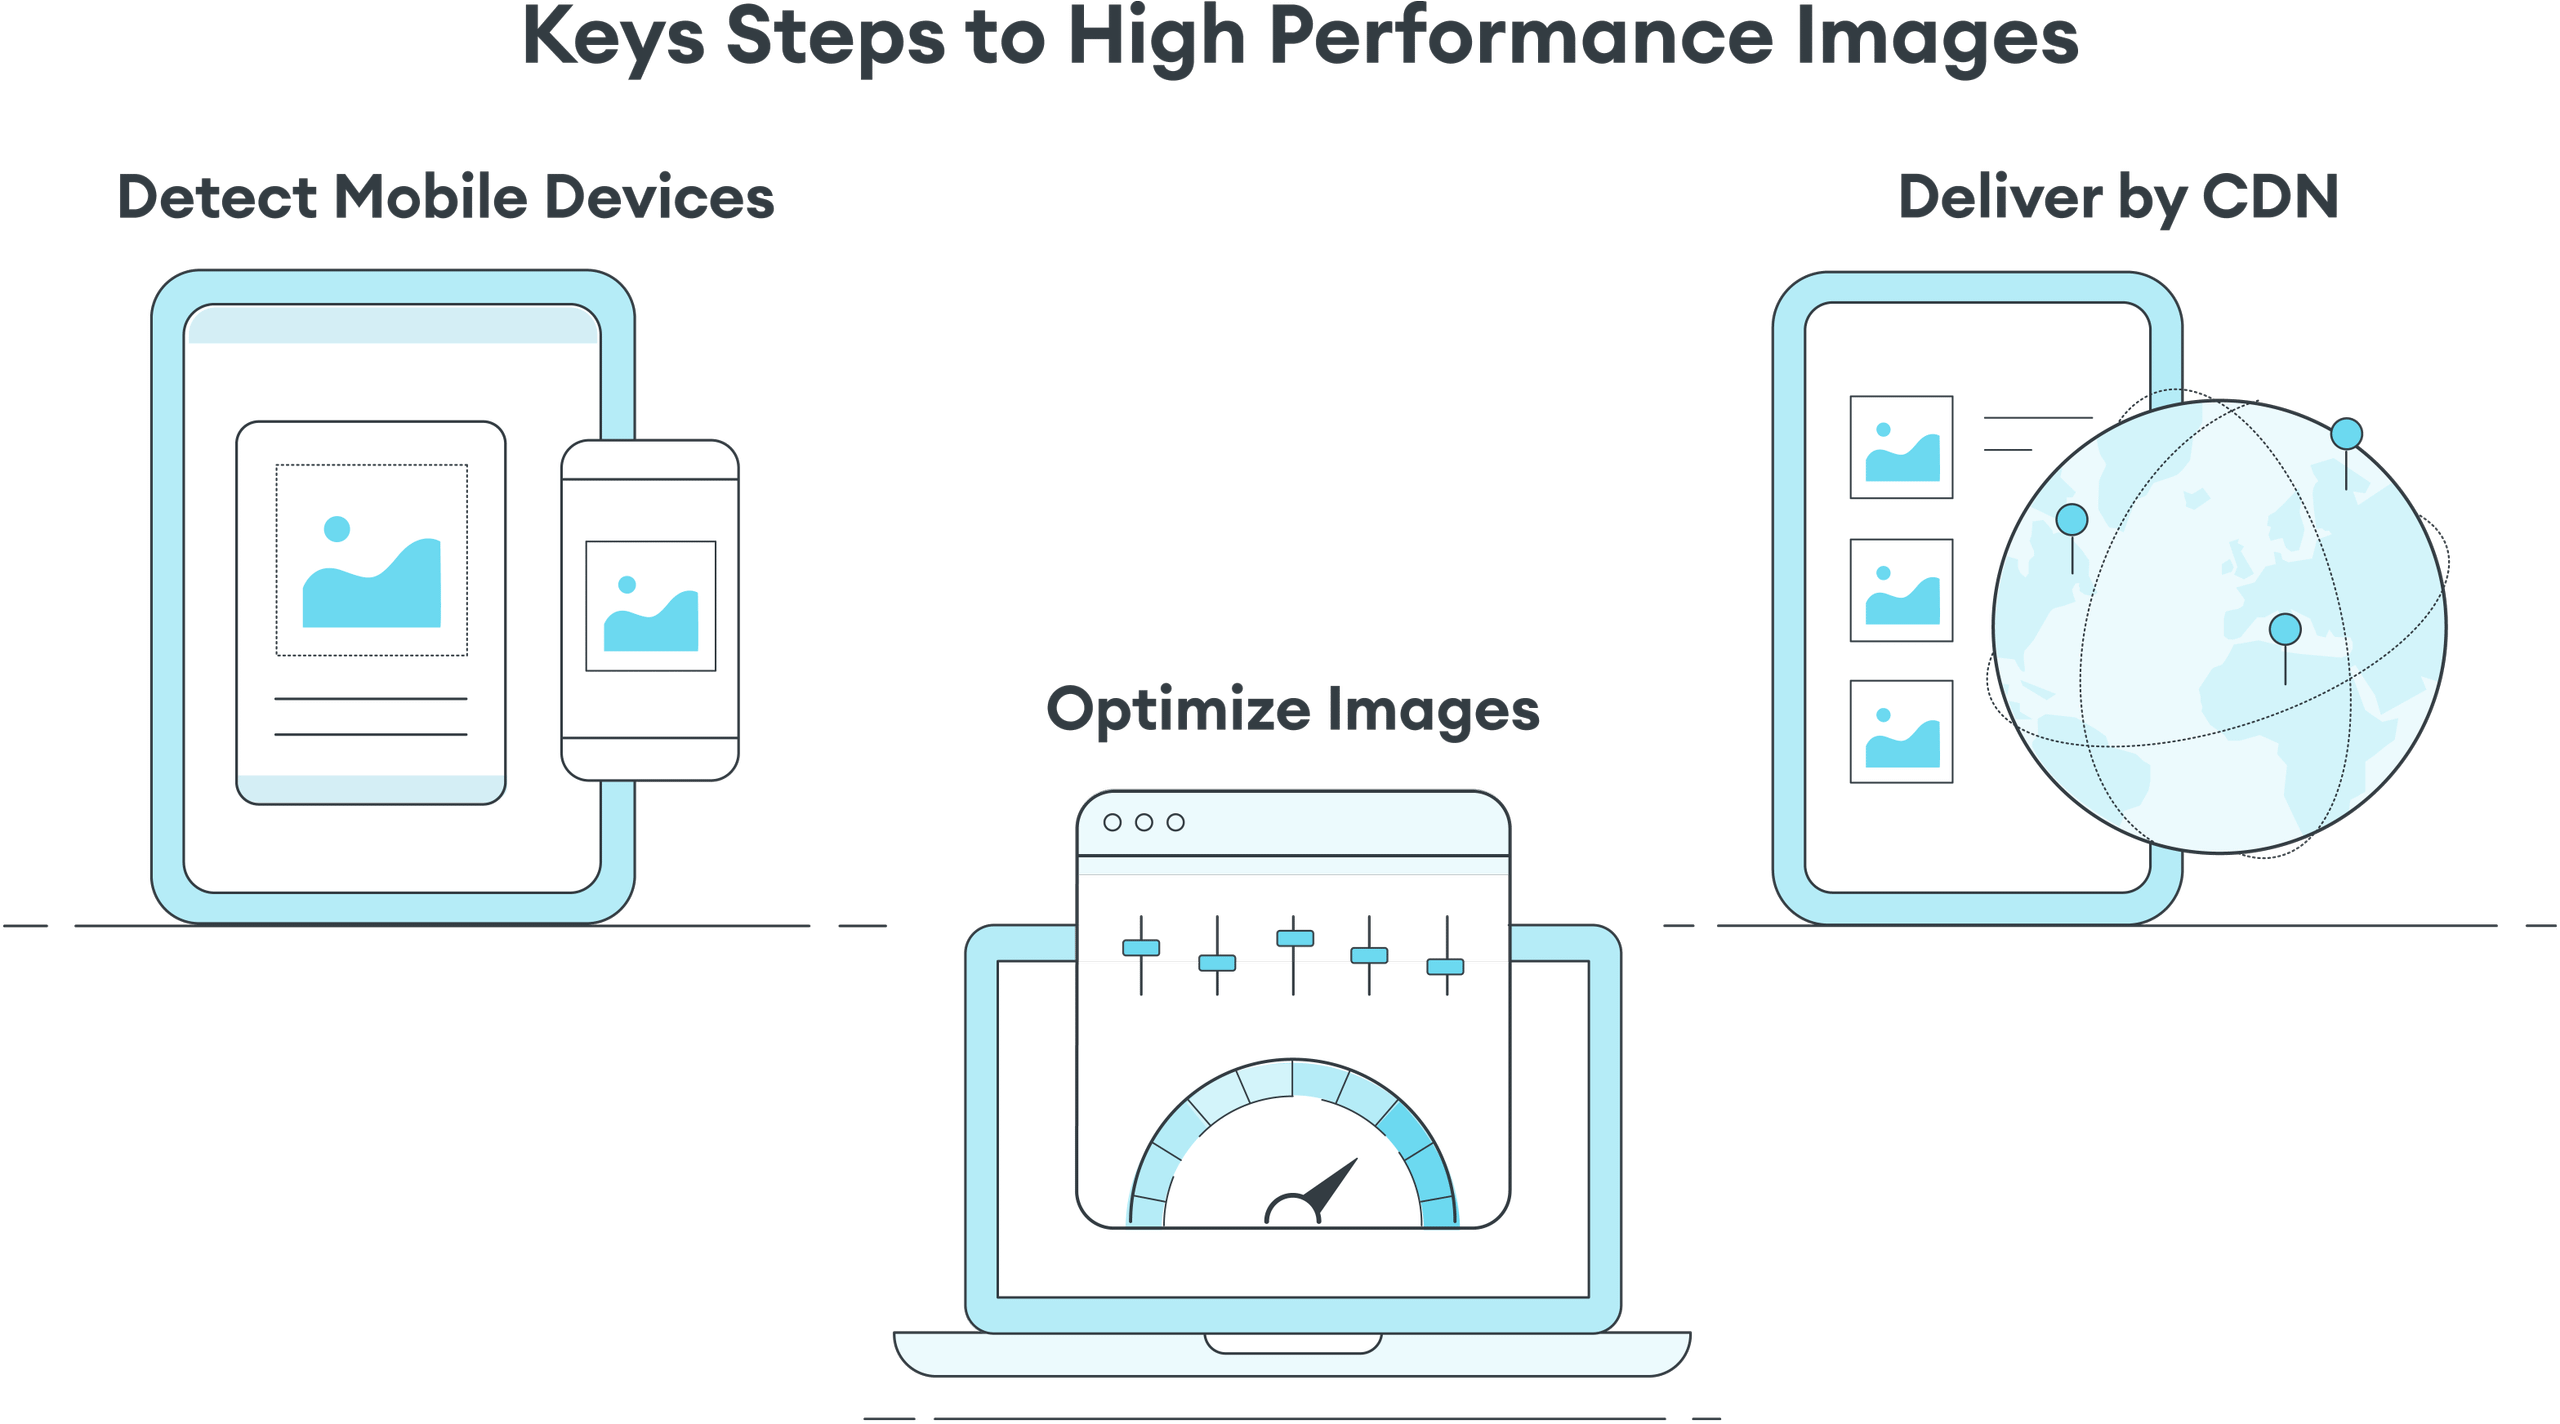 Key Steps to High Performance Images